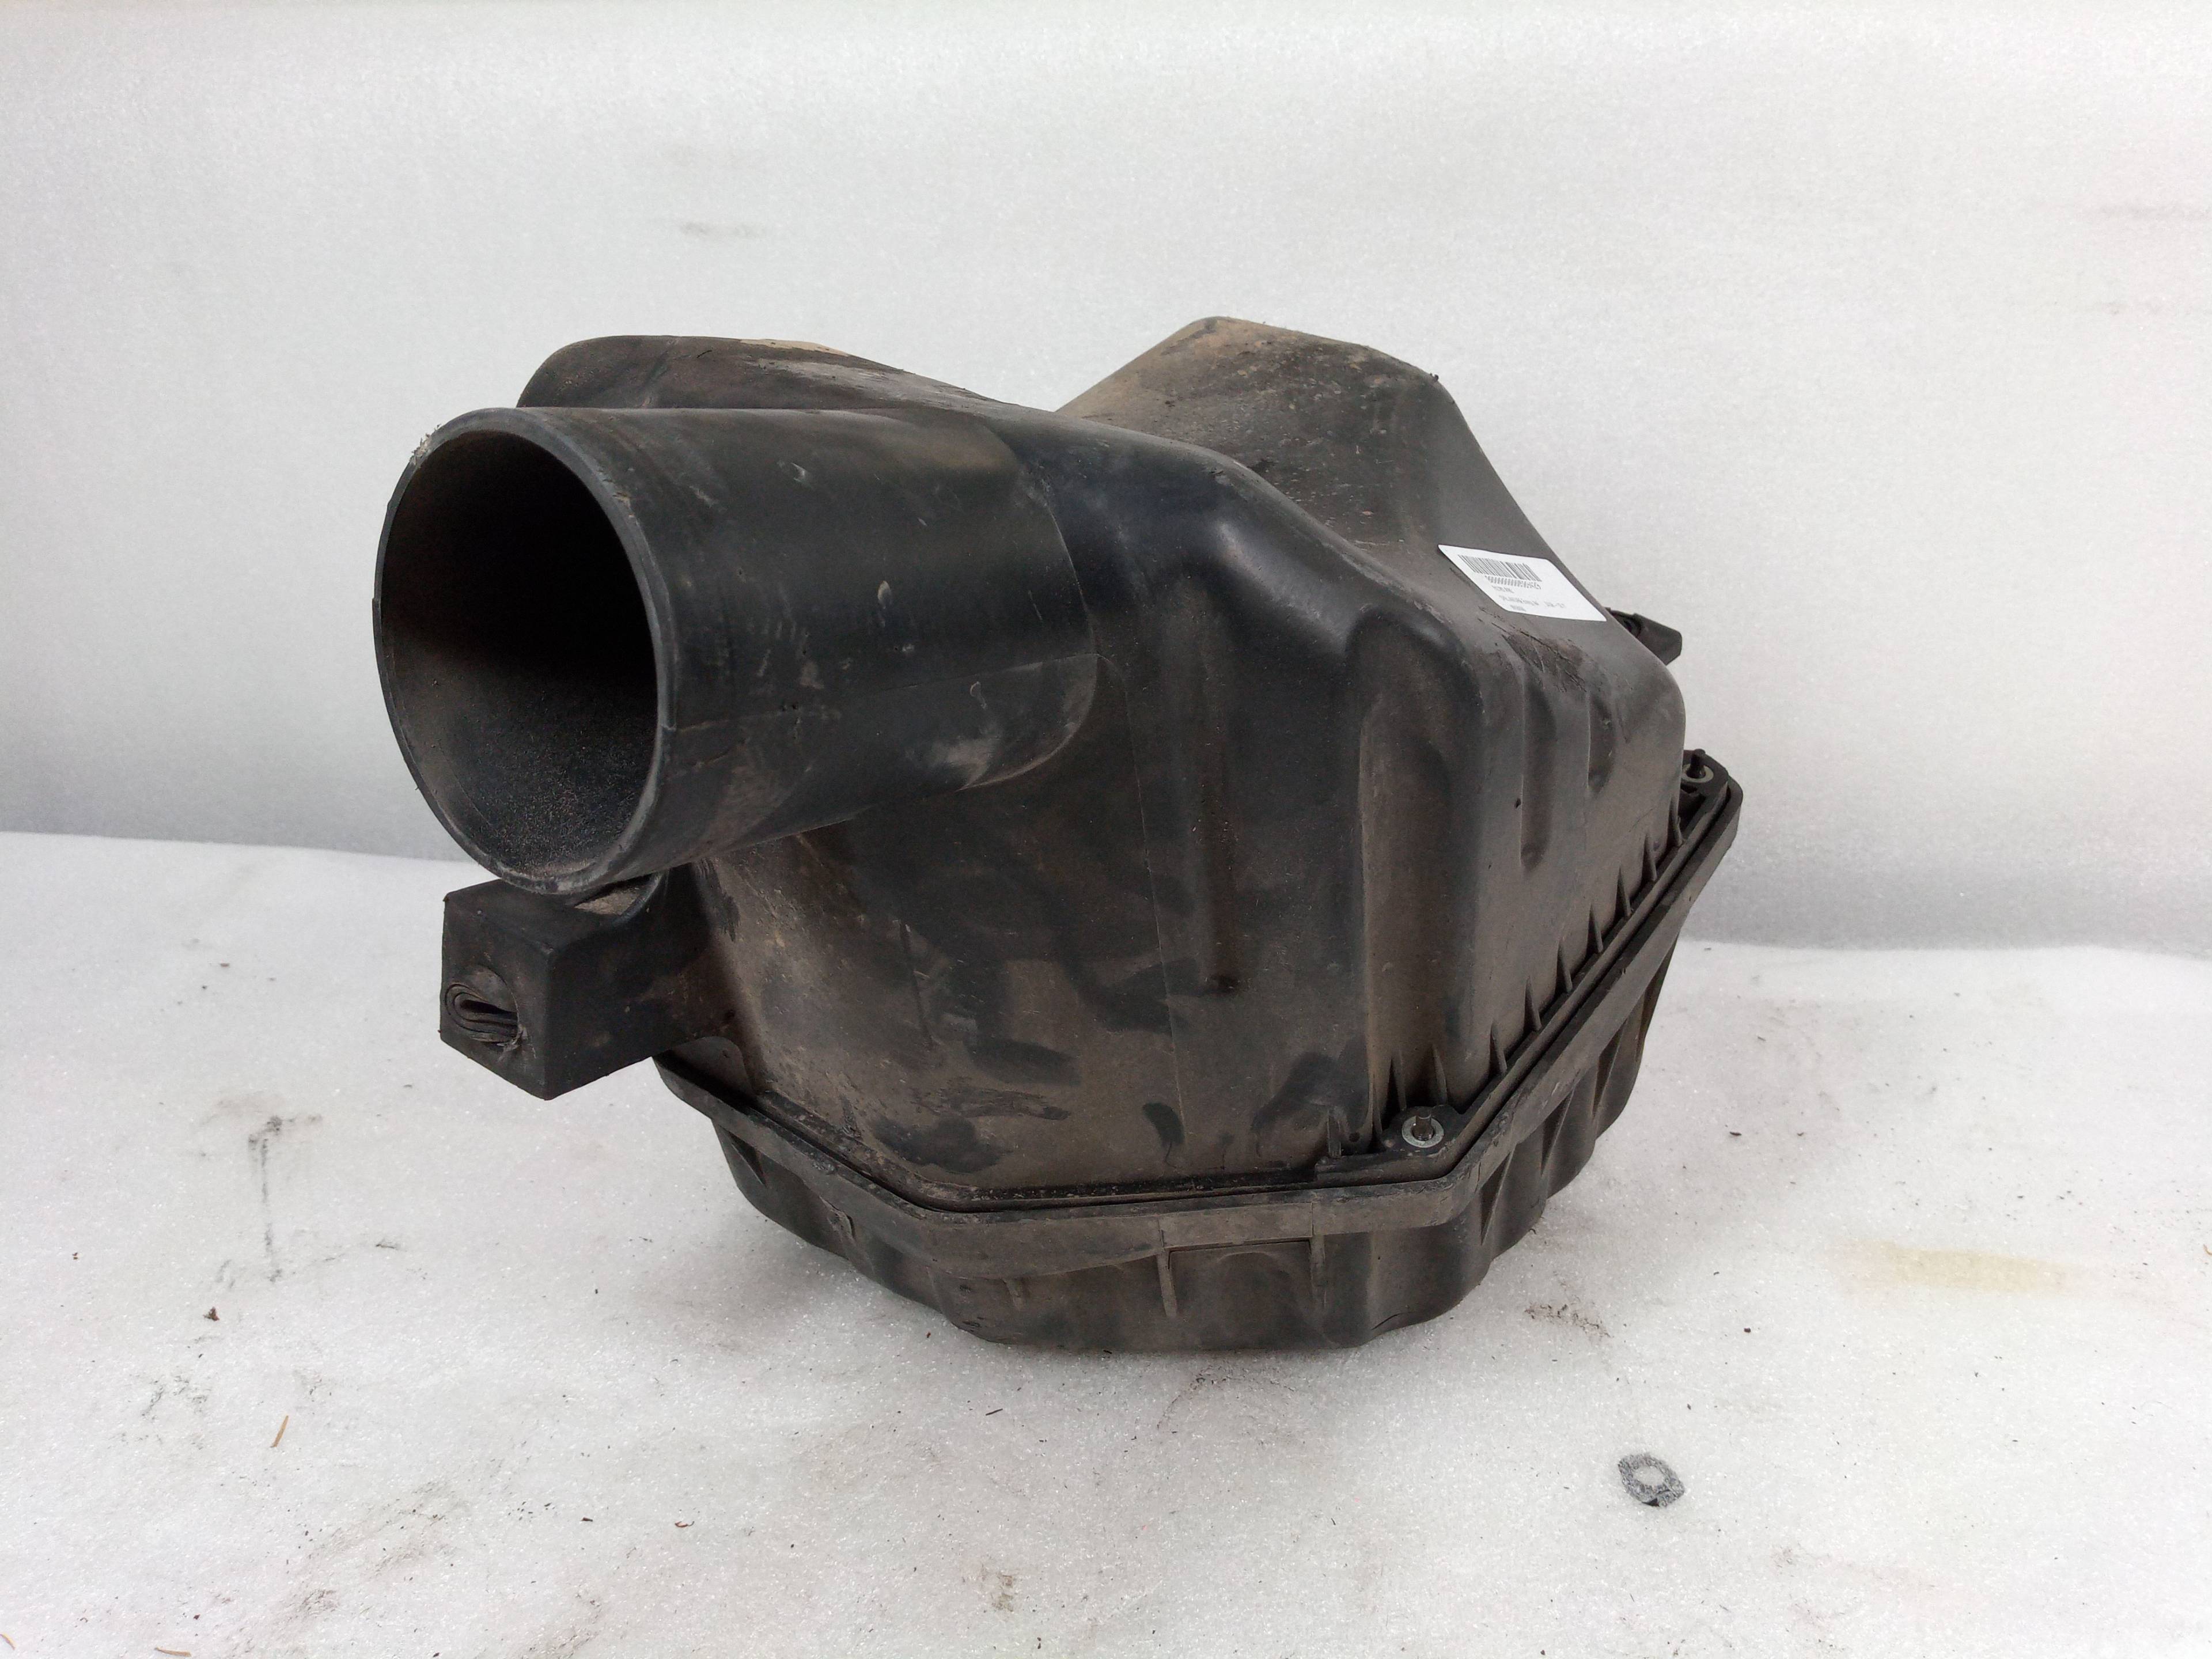 OPEL Antara 1 generation (2006-2015) Other Engine Compartment Parts 96628880 23967005